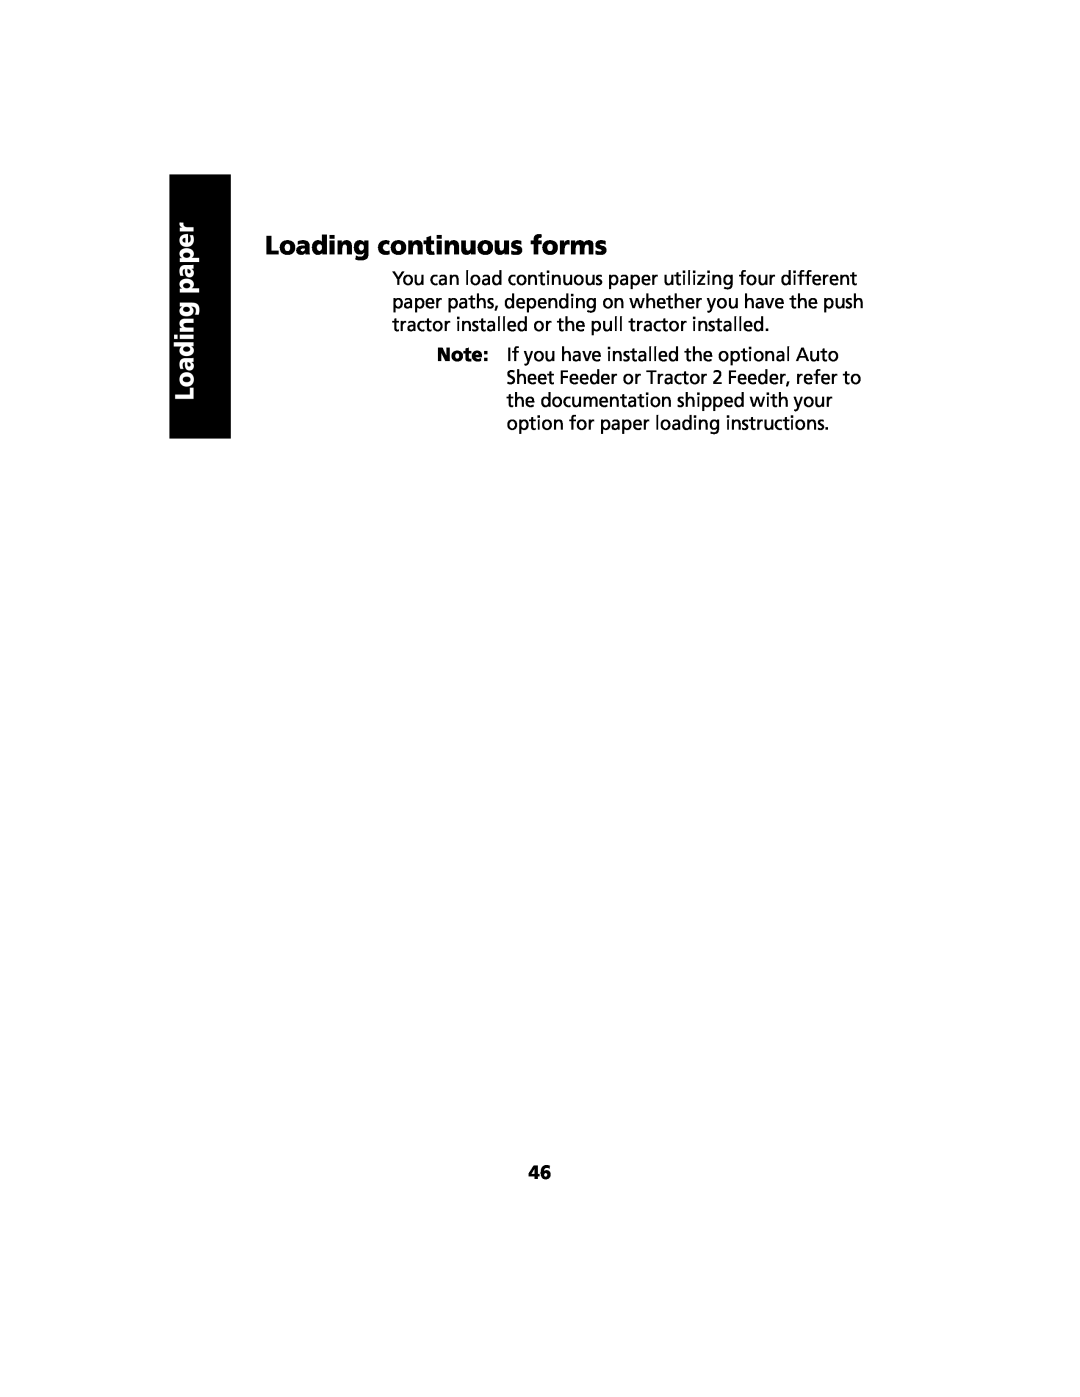 Lexmark 2480 manual Loading continuous forms, Loading paper 